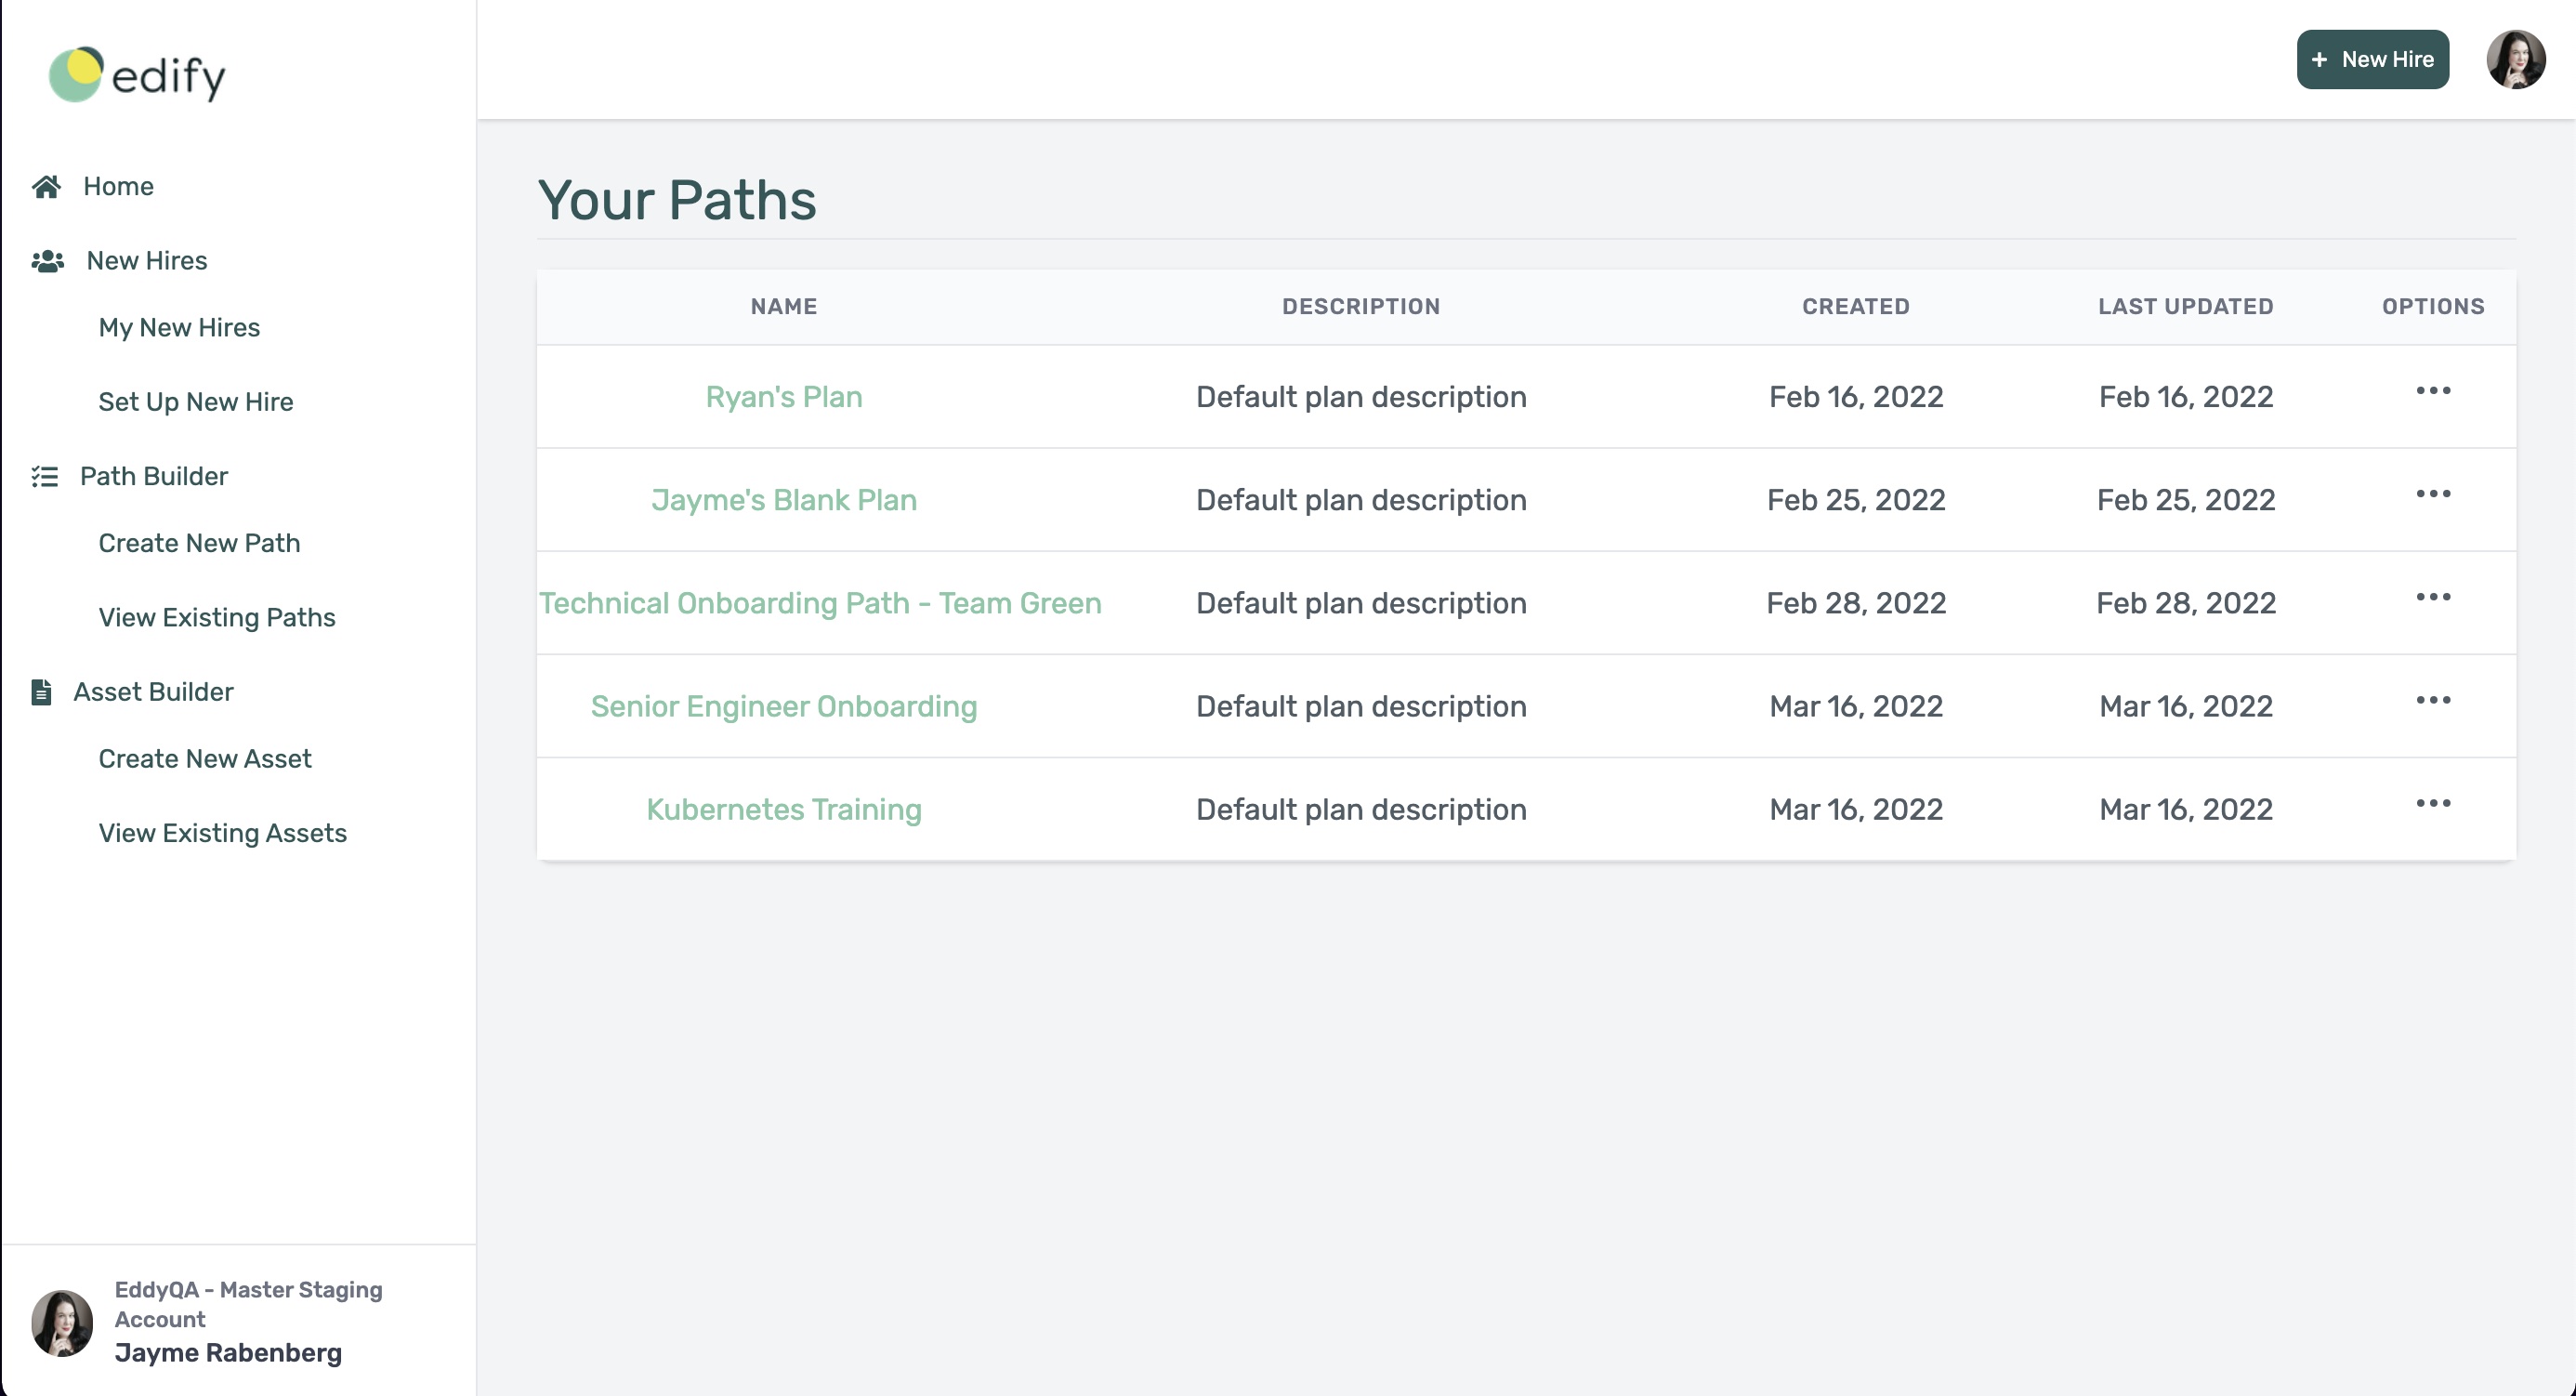 Customizable steps and reusable assets allow for role and team specific onboarding while still providing consistency.